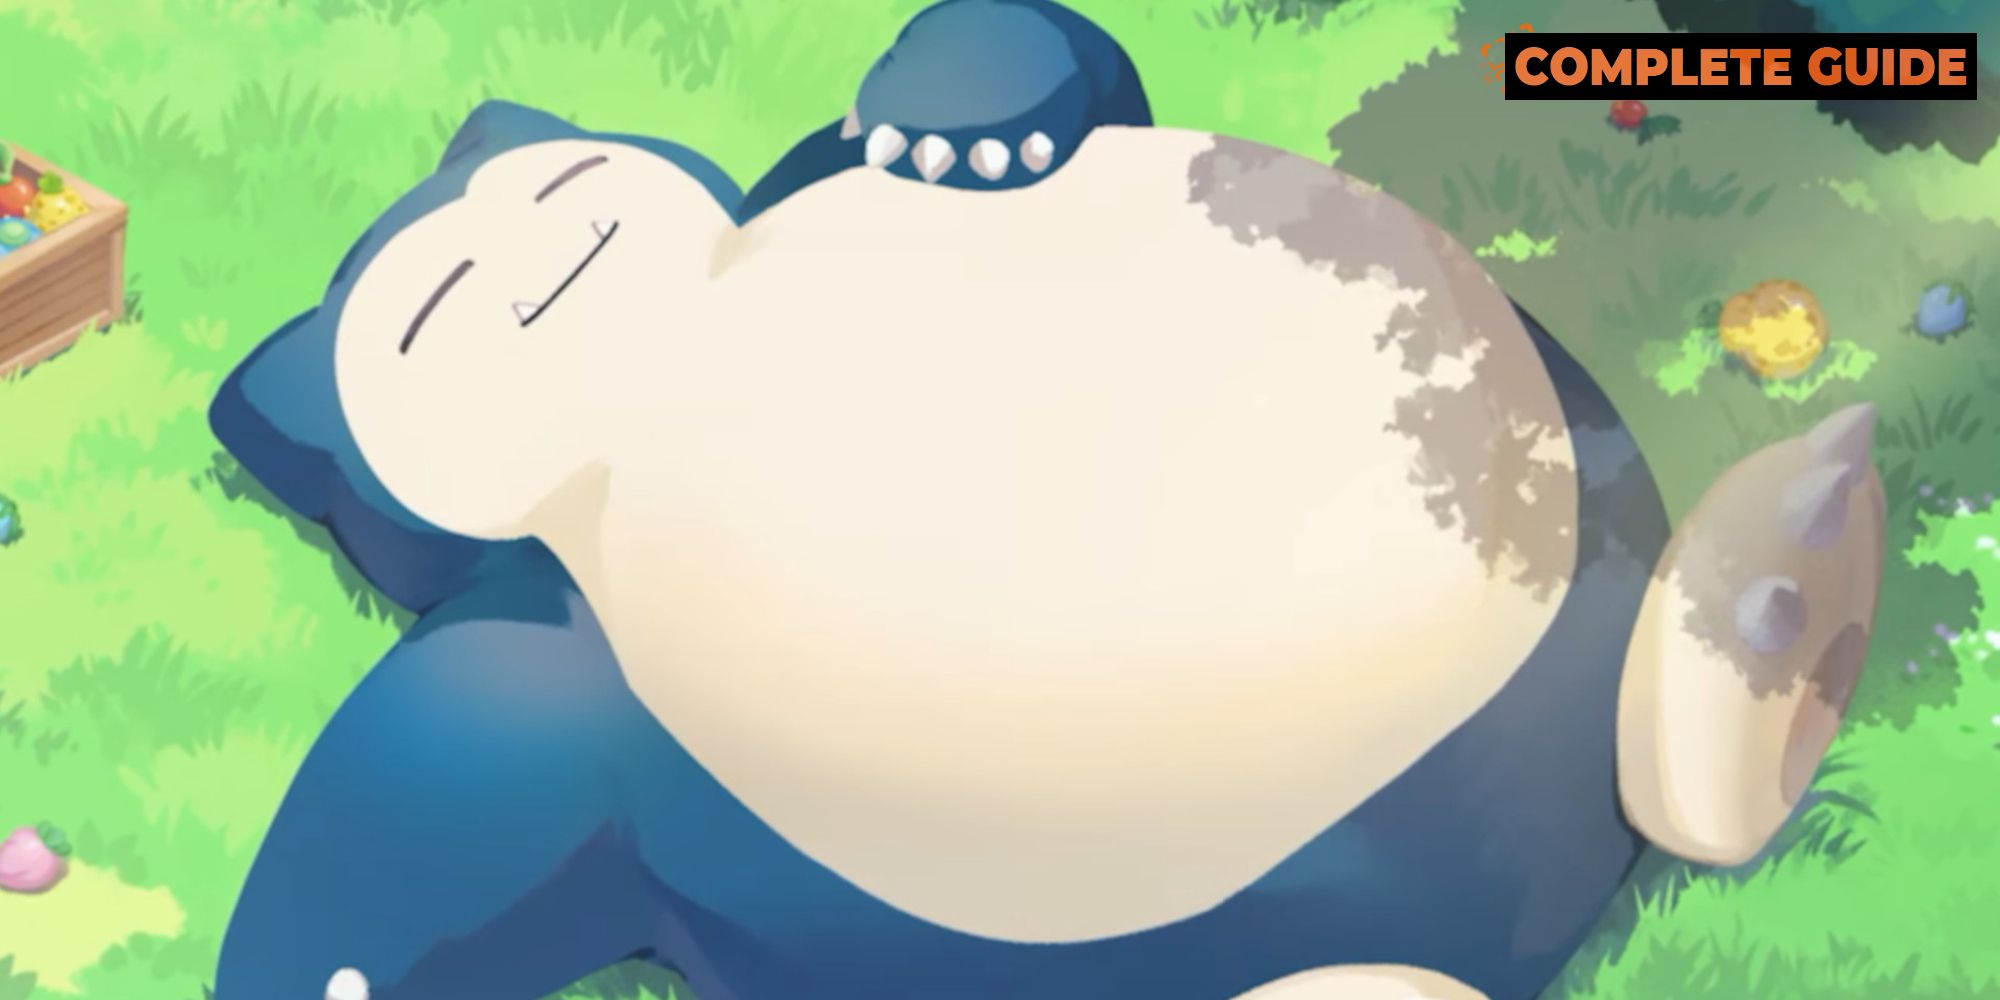 The Pokemon Sleep key artwork that depicts a Snorlax sleeping with a Complete Guide overlay in the top right corner.